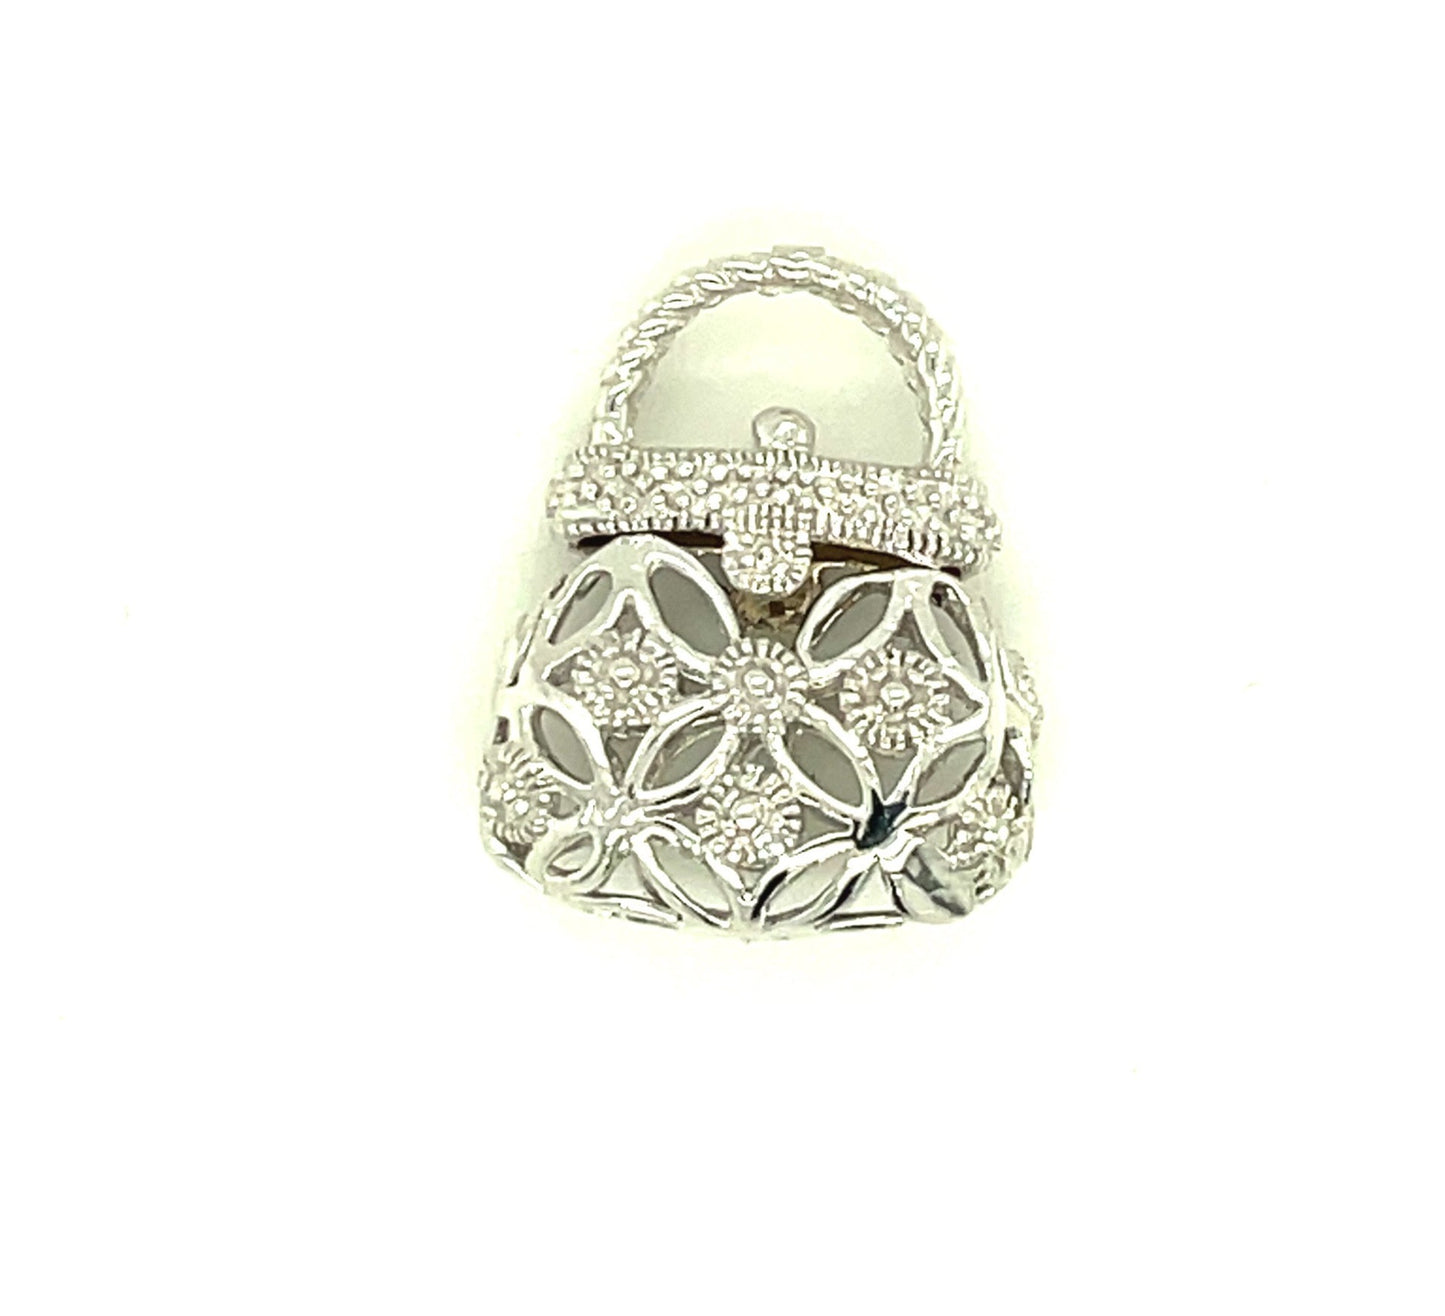 10k White Gold and Diamond Purse Pendant and Chain 18"